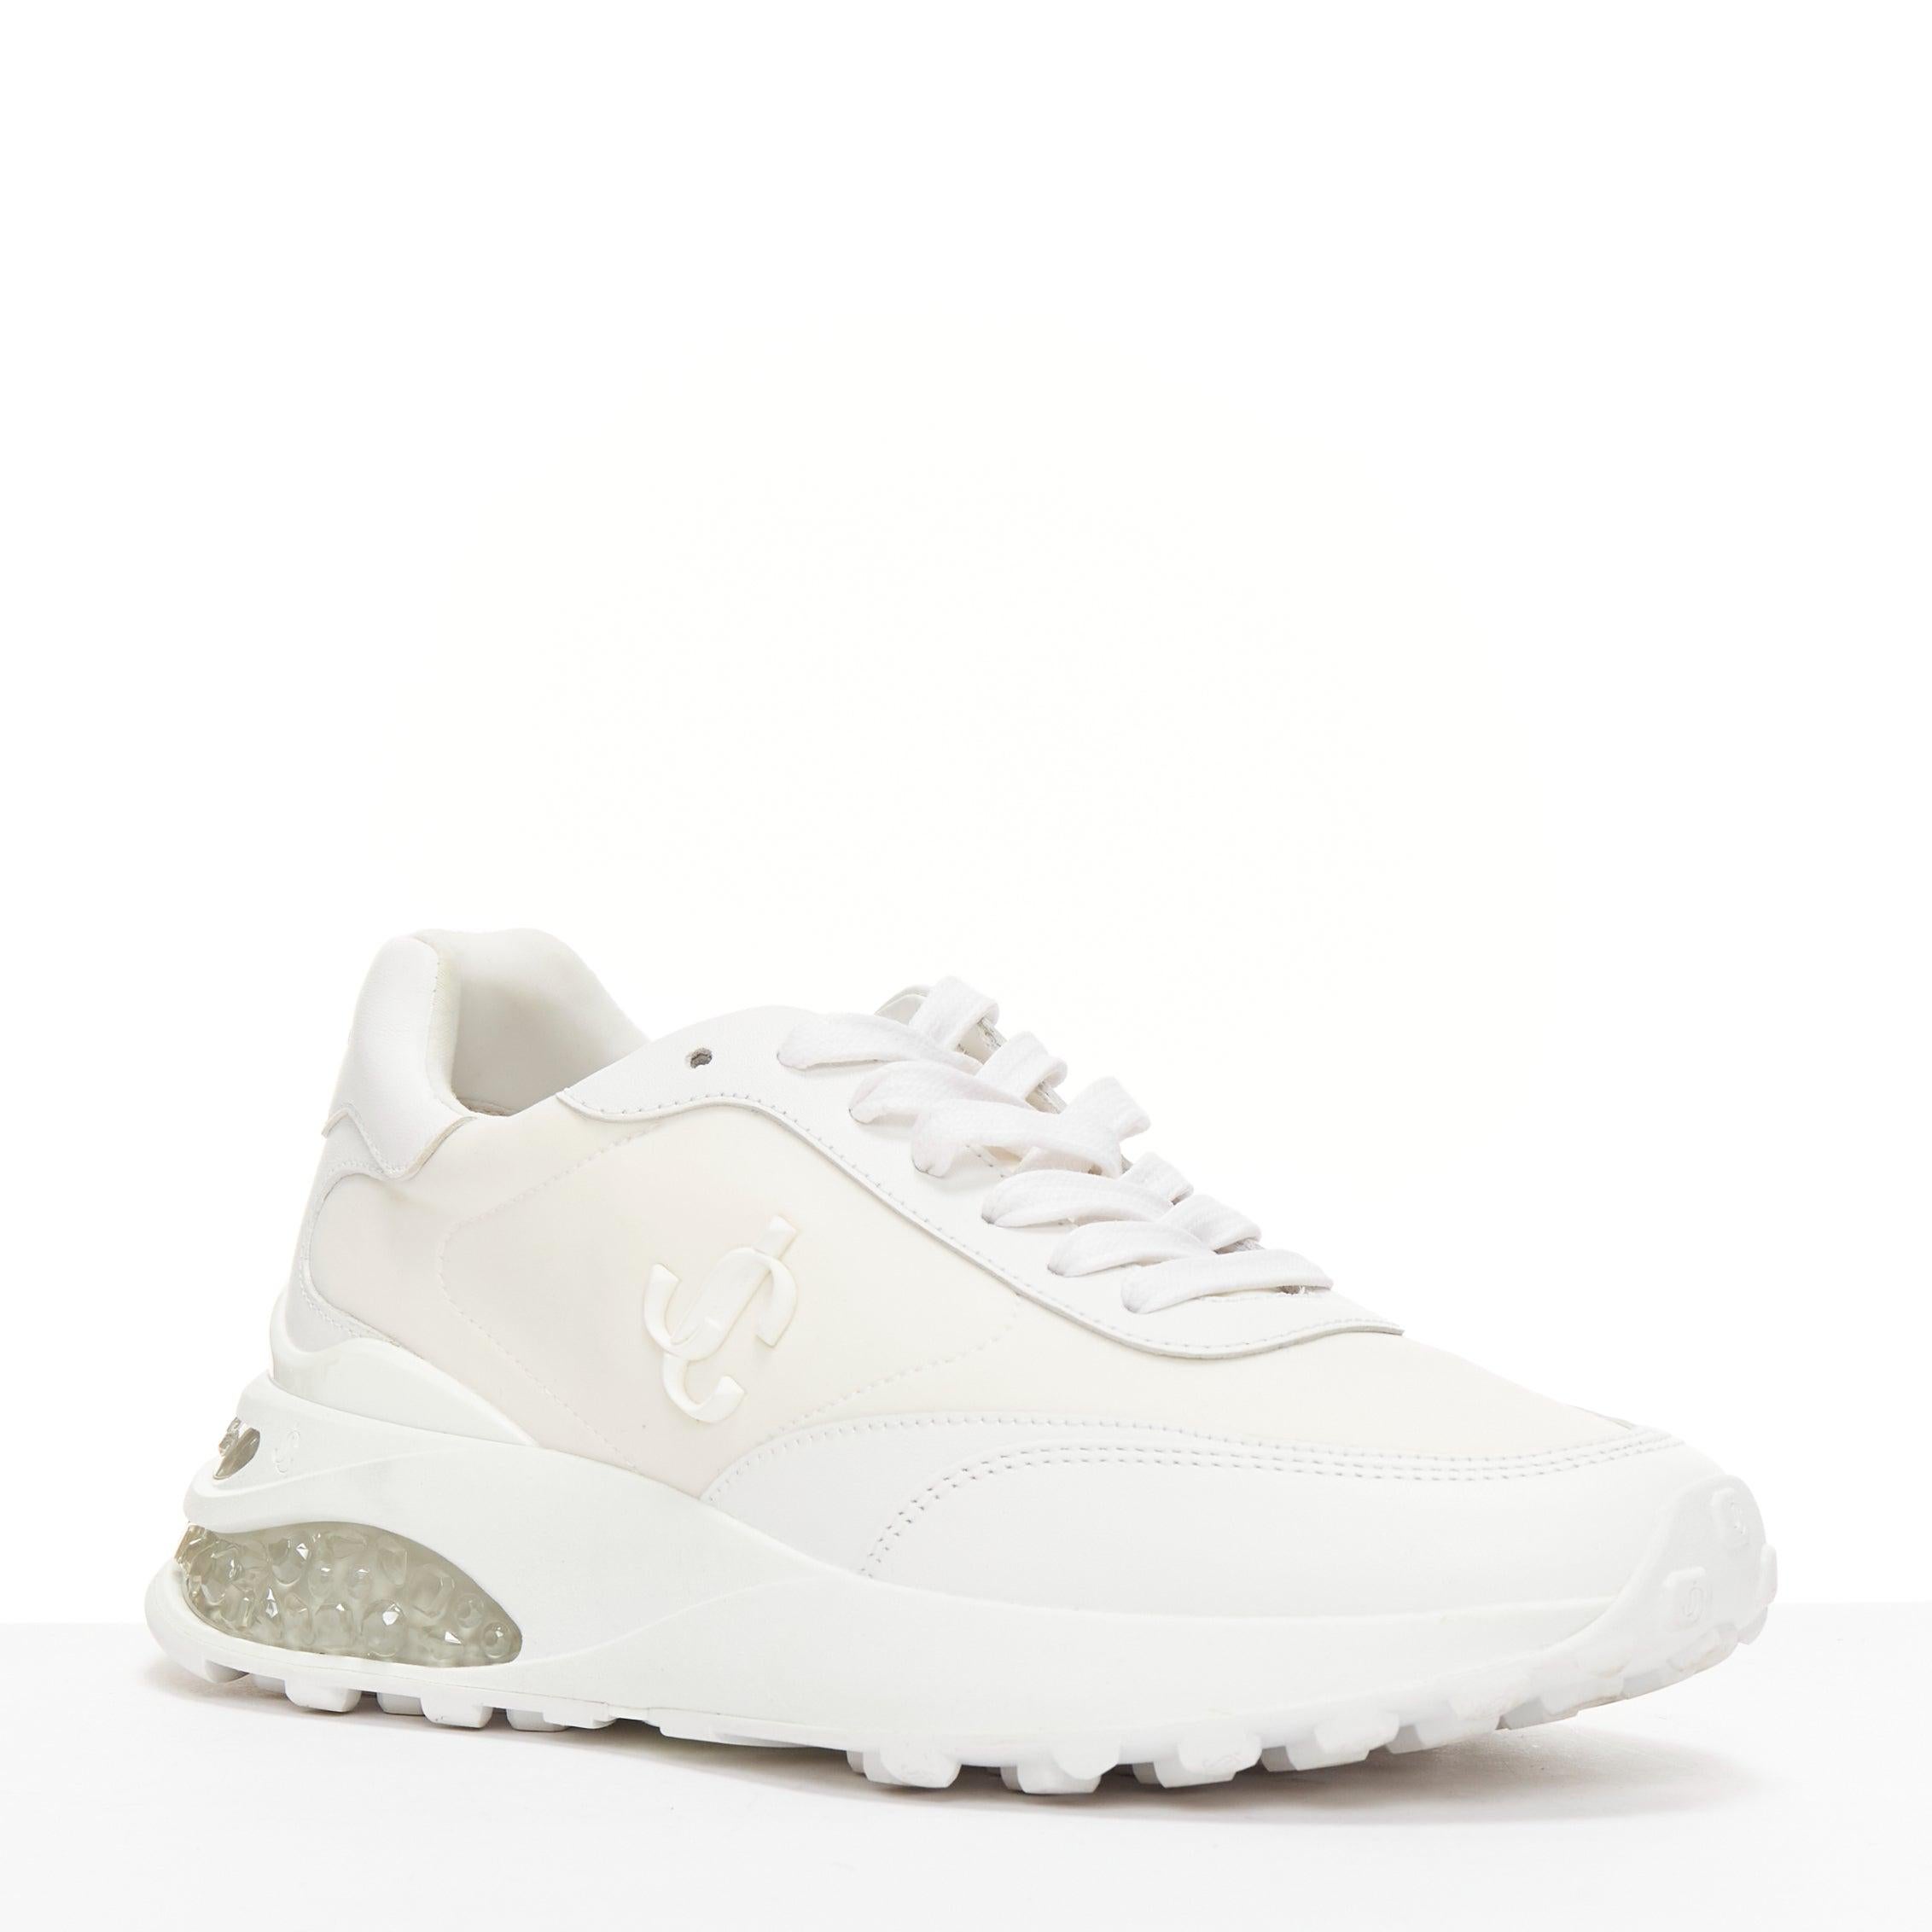 JIMMY CHOO Memphis white JC logo clear debossed crystal dad sneakers EU38.5
Reference: AAWC/A01170
Brand: Jimmy Choo
Model: Memphis
Material: Leather, Fabric
Color: White, Off White
Pattern: Solid
Closure: Lace Up
Lining: White Fabric
Extra Details: